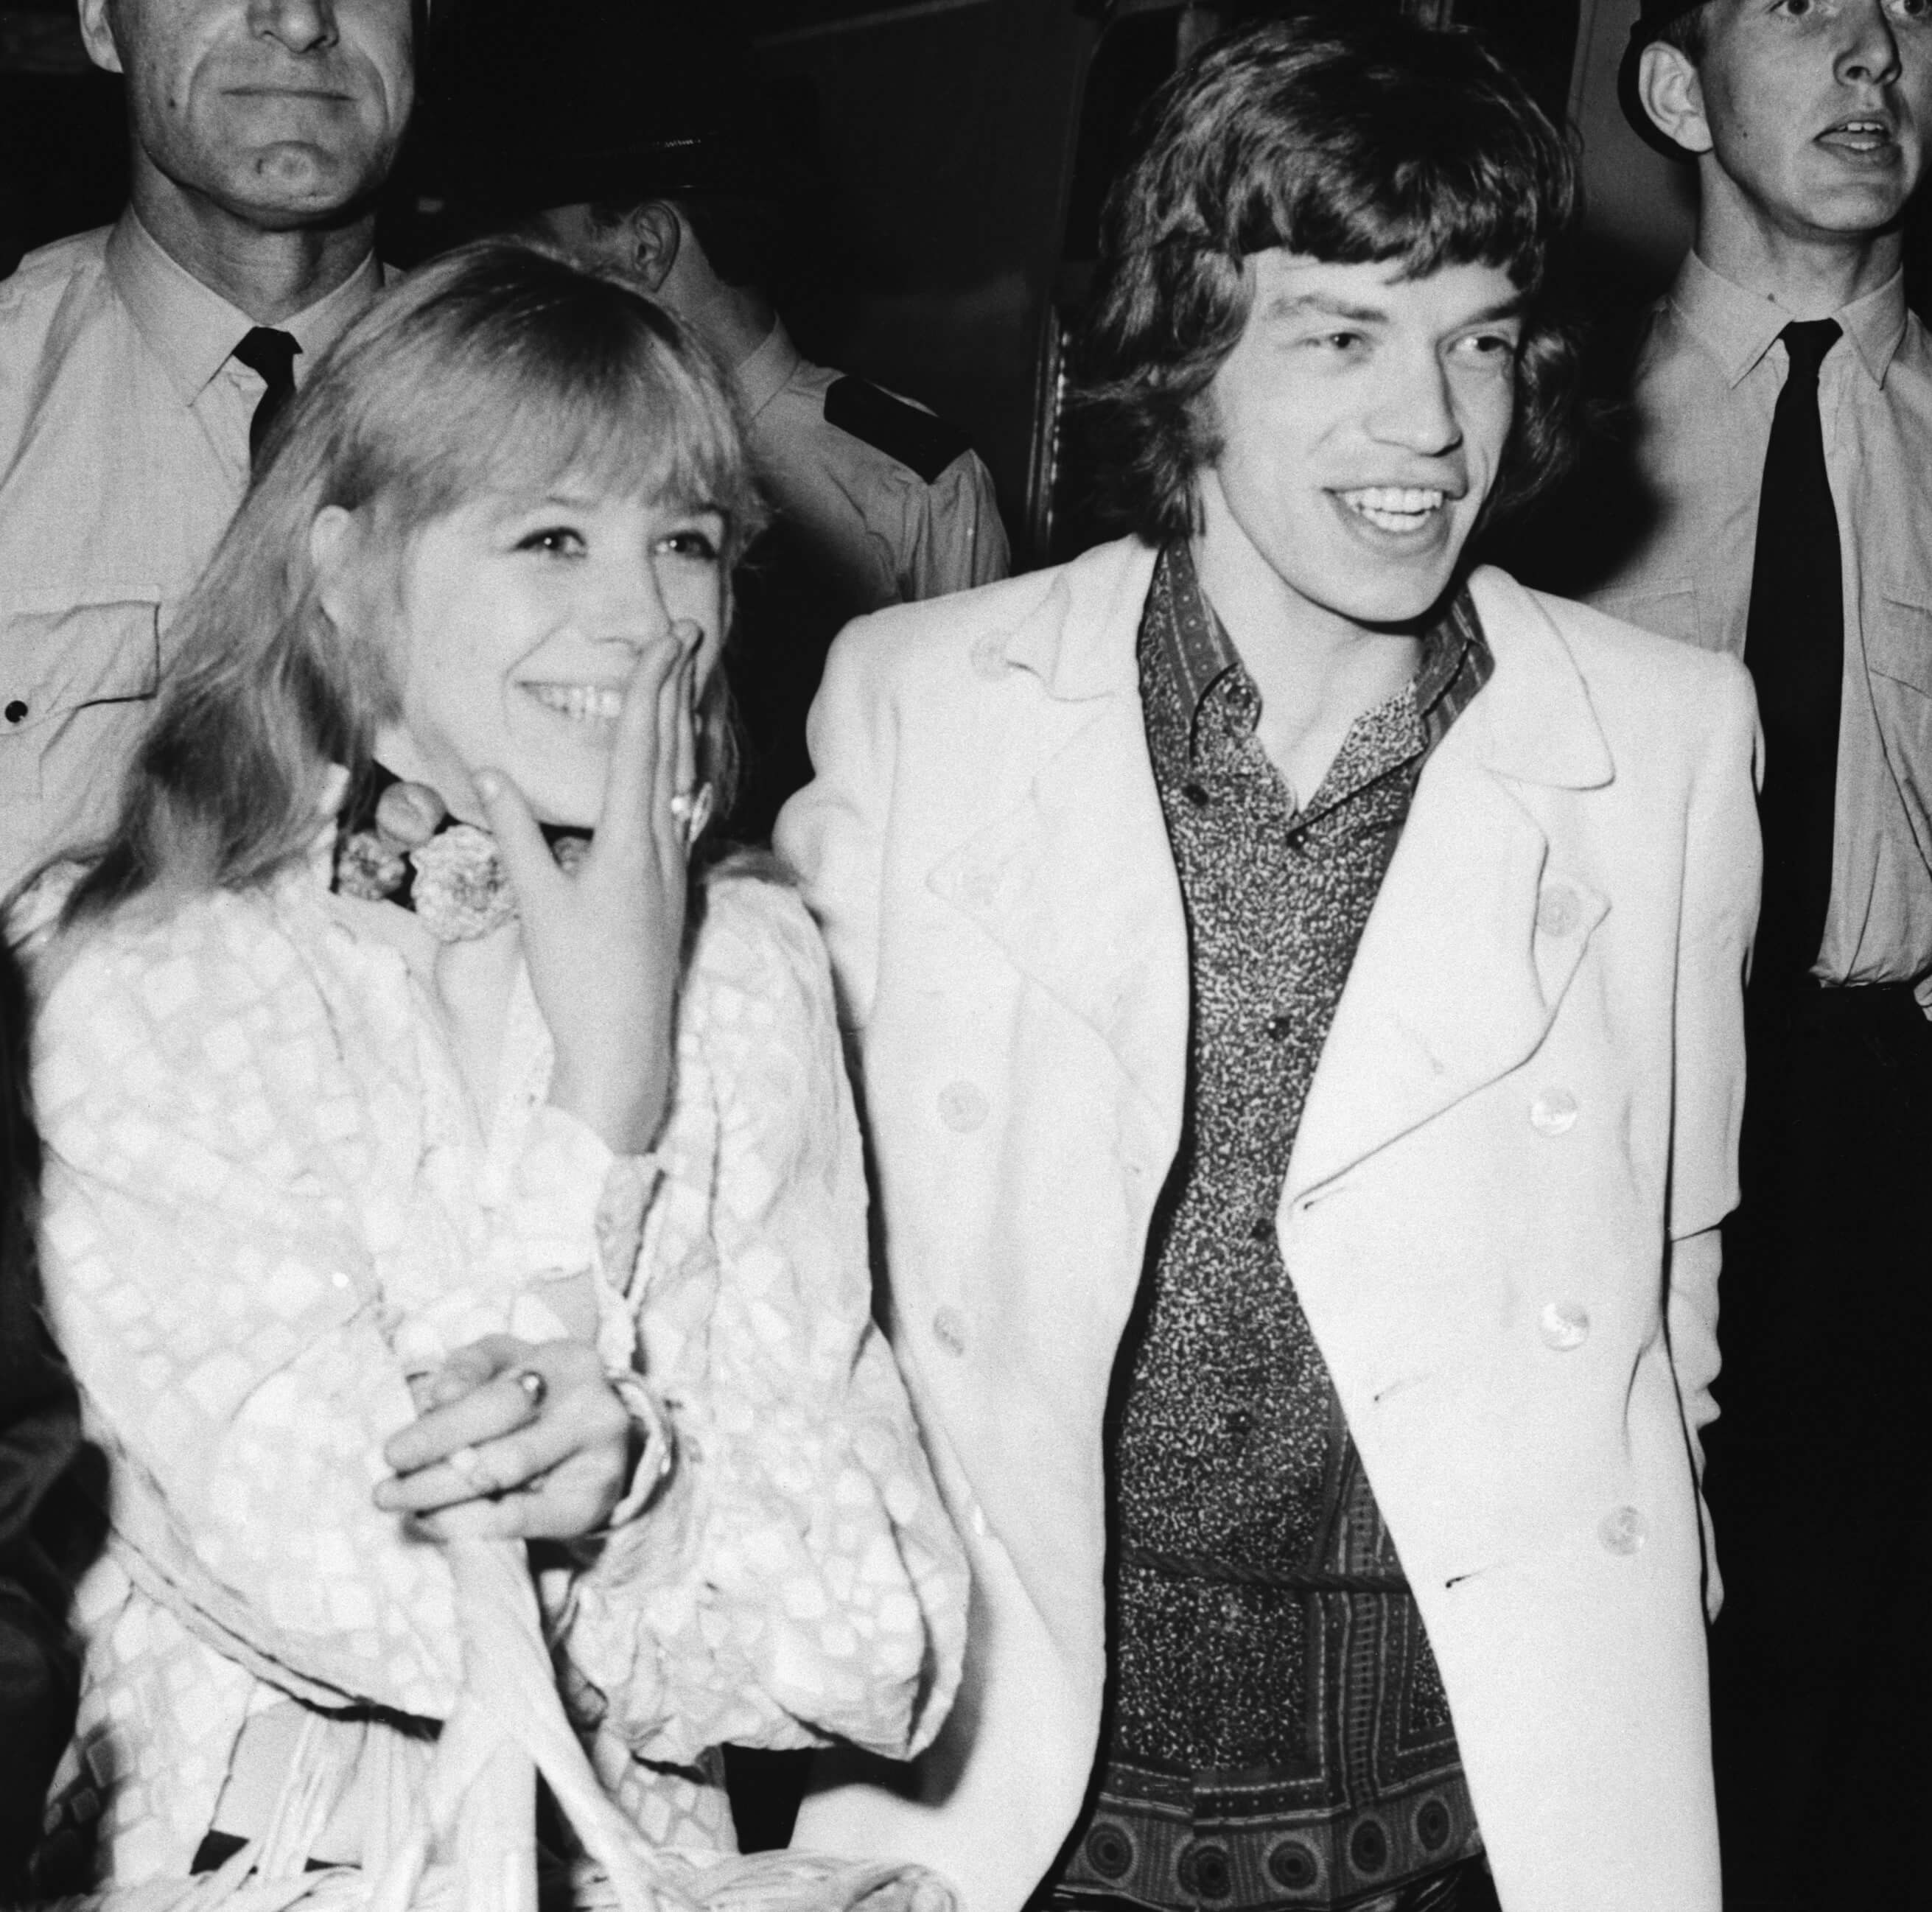 "As Tears Go By" singer Marianne Faithfull and The Rolling Stones' Mick Jagger in black-and-white